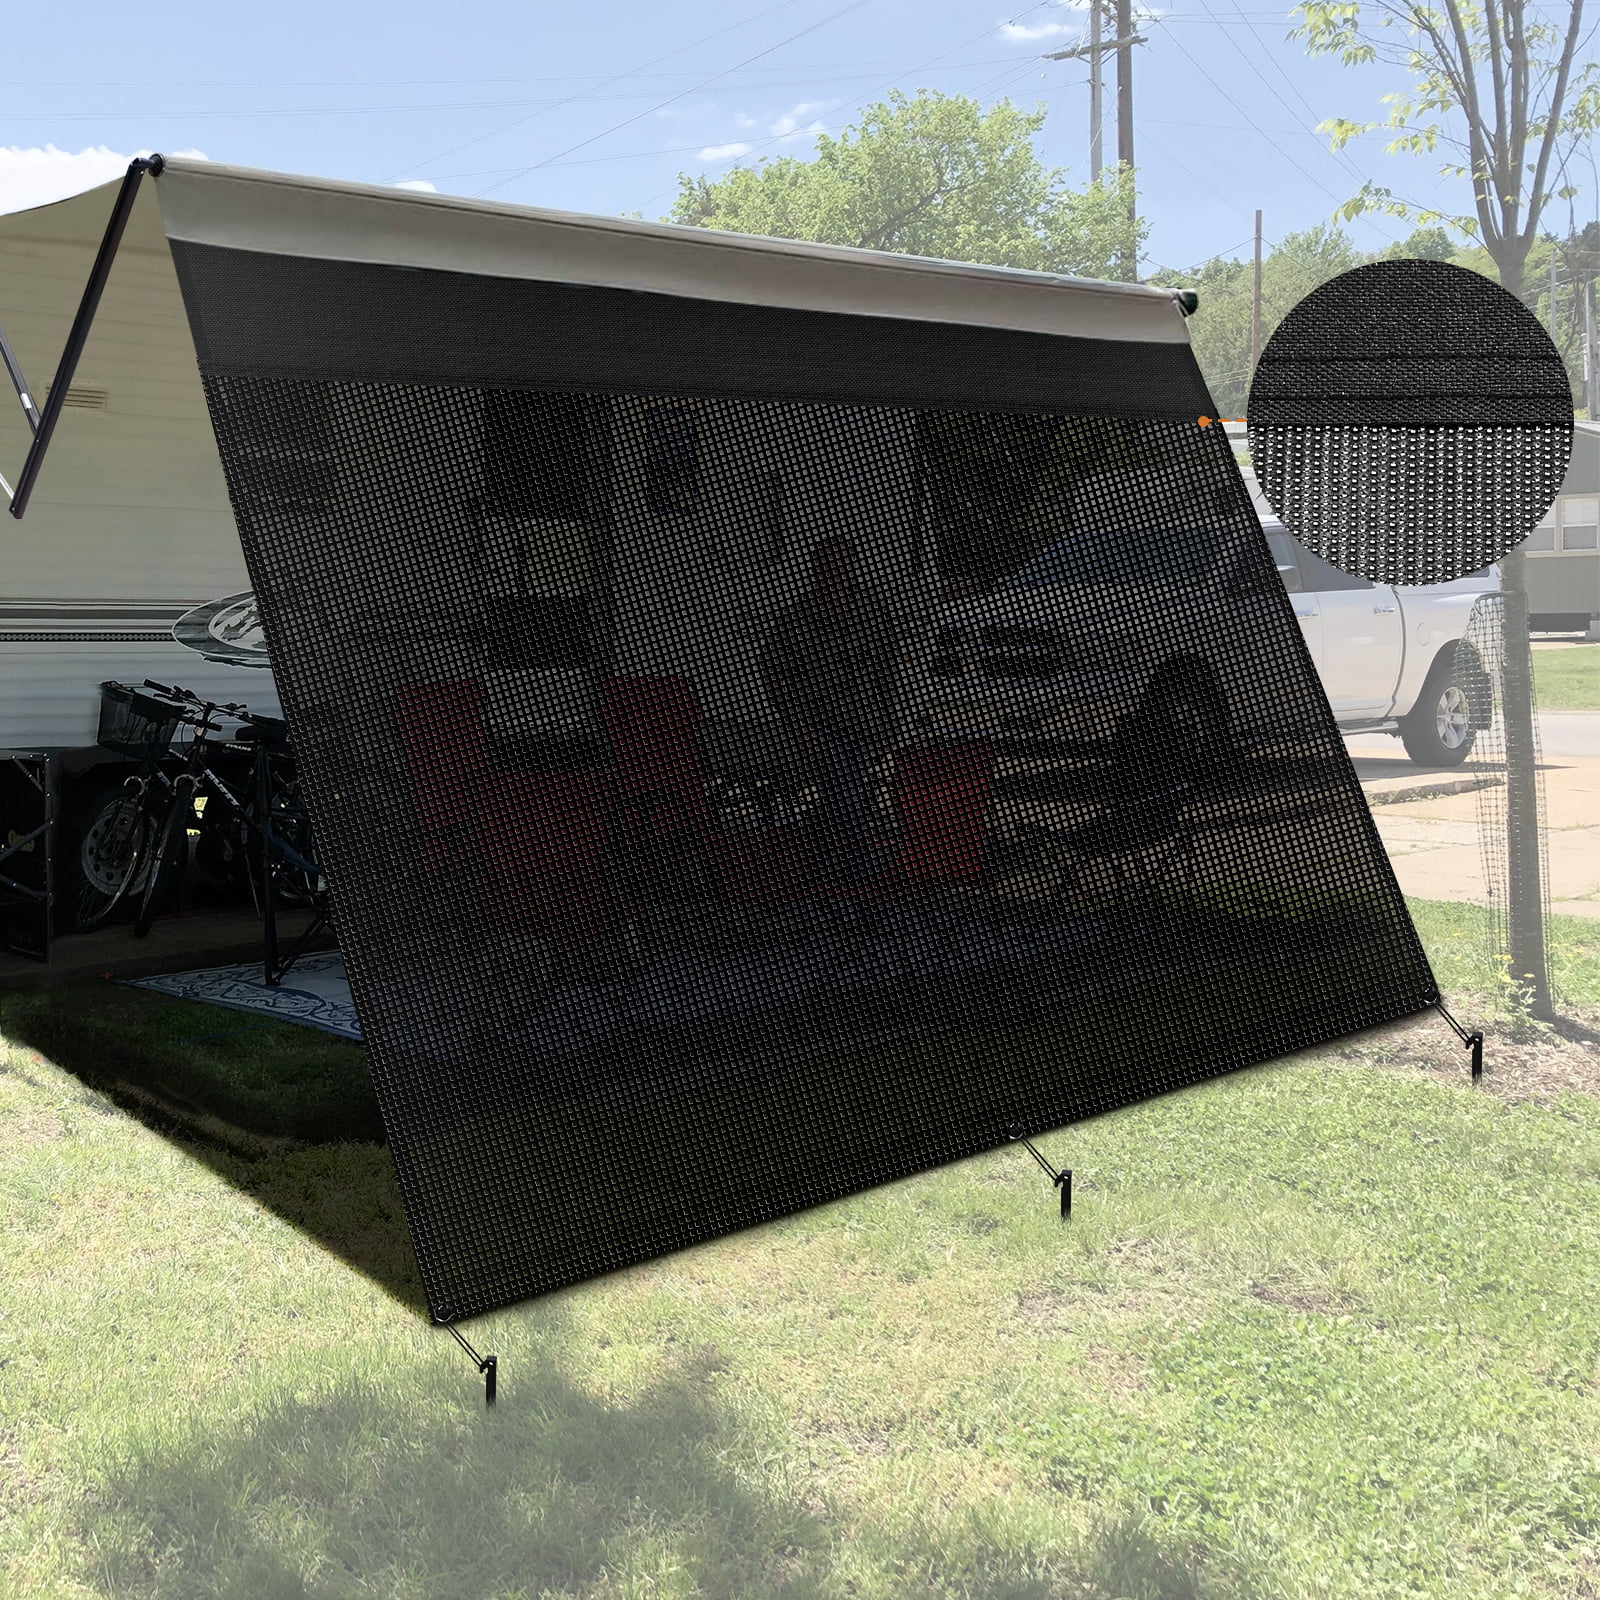 HGmart RV Awning Shade Compelete Kits for Outdoor Shade 8x10ft Grey 